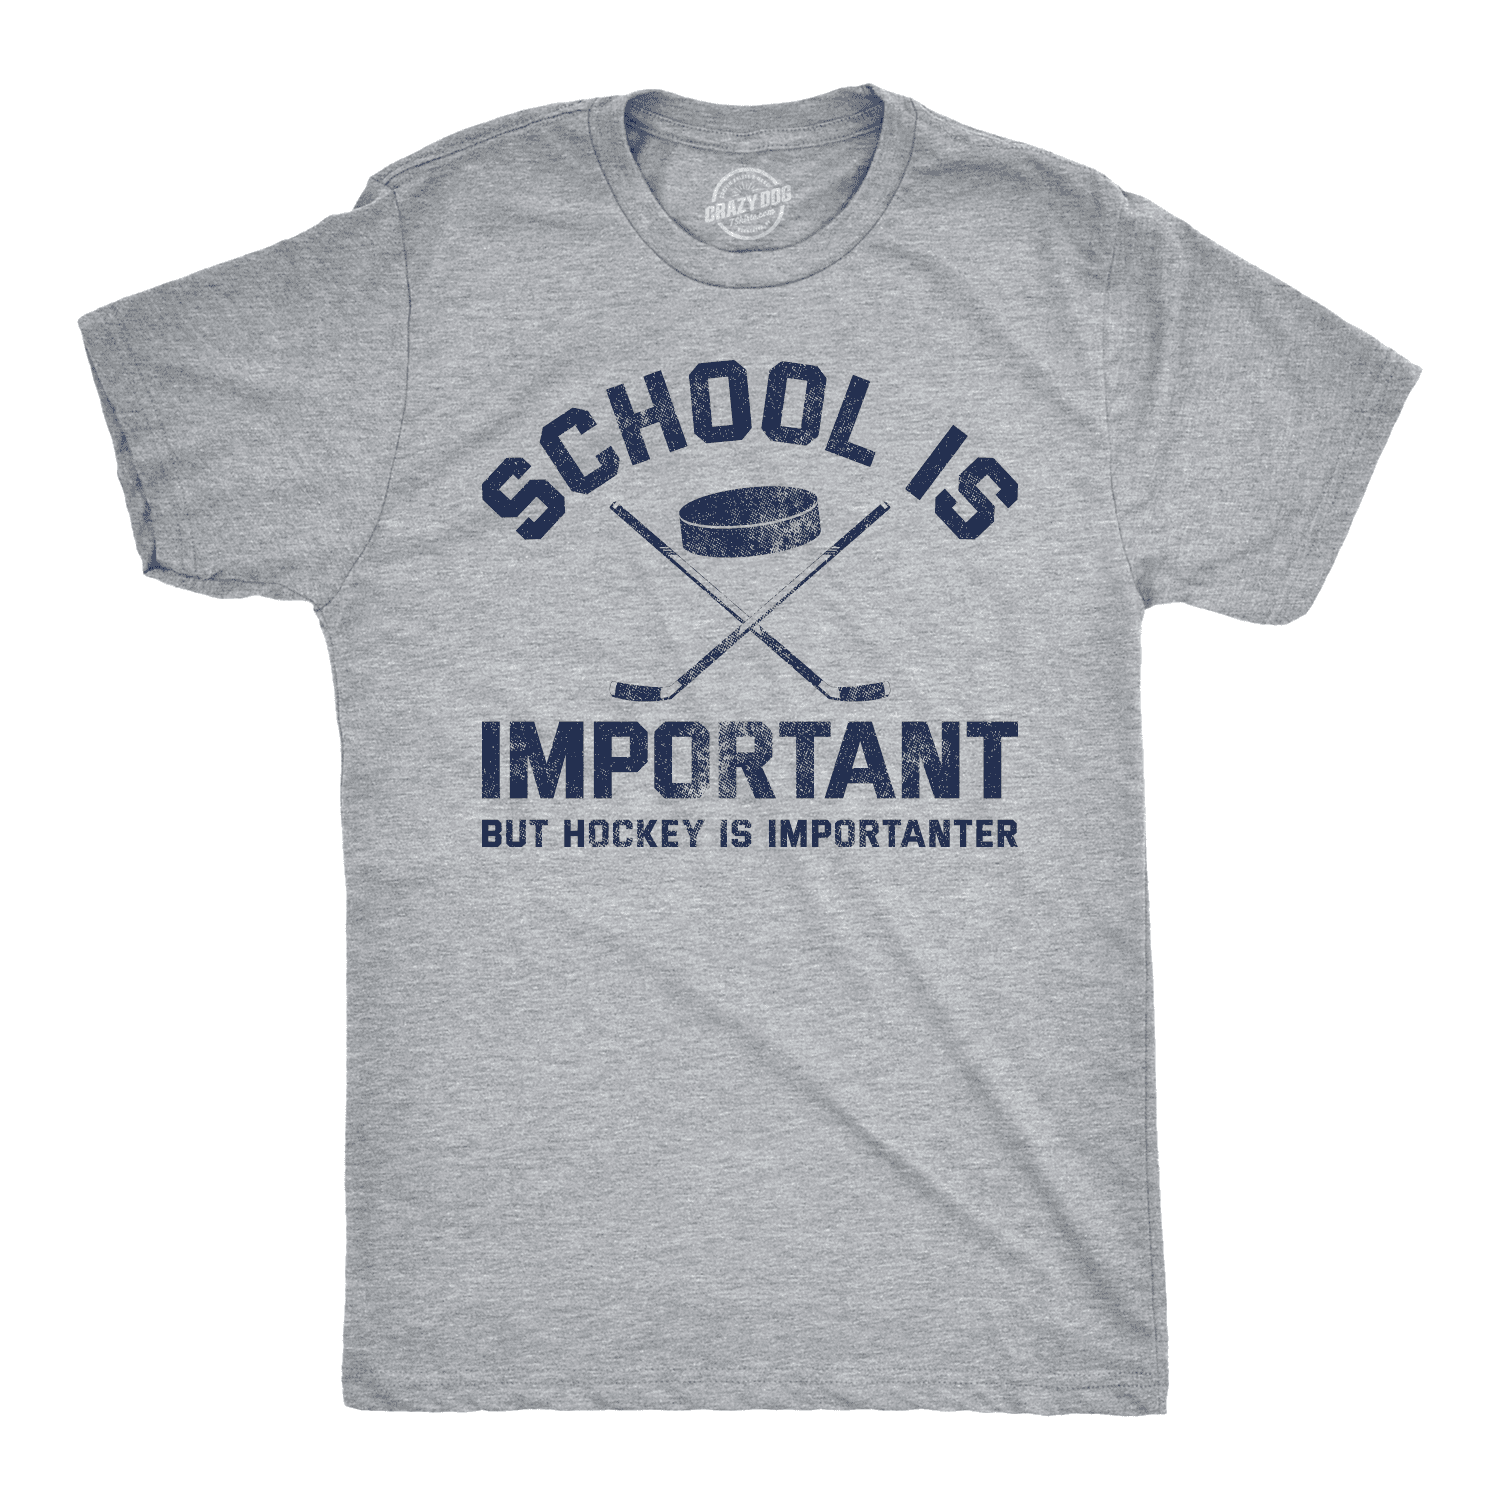 Education is Important But Swimming is Importanter Kids Tee Shirt 2T-XL 